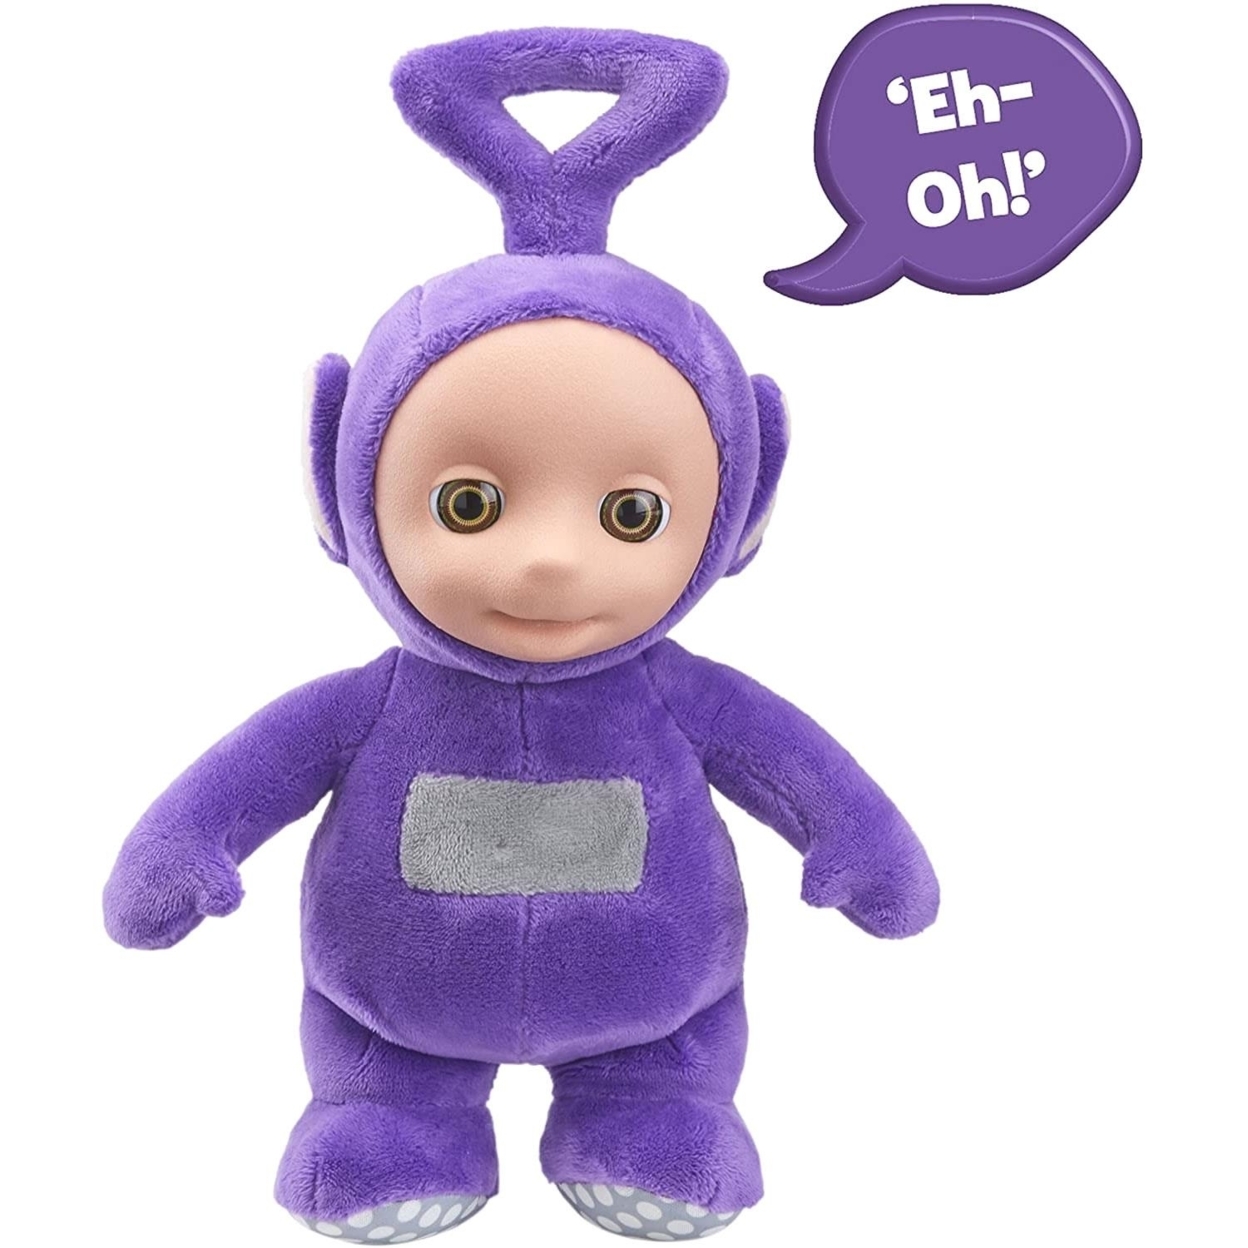 Teletubbies Talking Tinky Winky Purple Plush 11" Doll Giggles Teletubby Toy Mighty Mojo - image 1 of 6